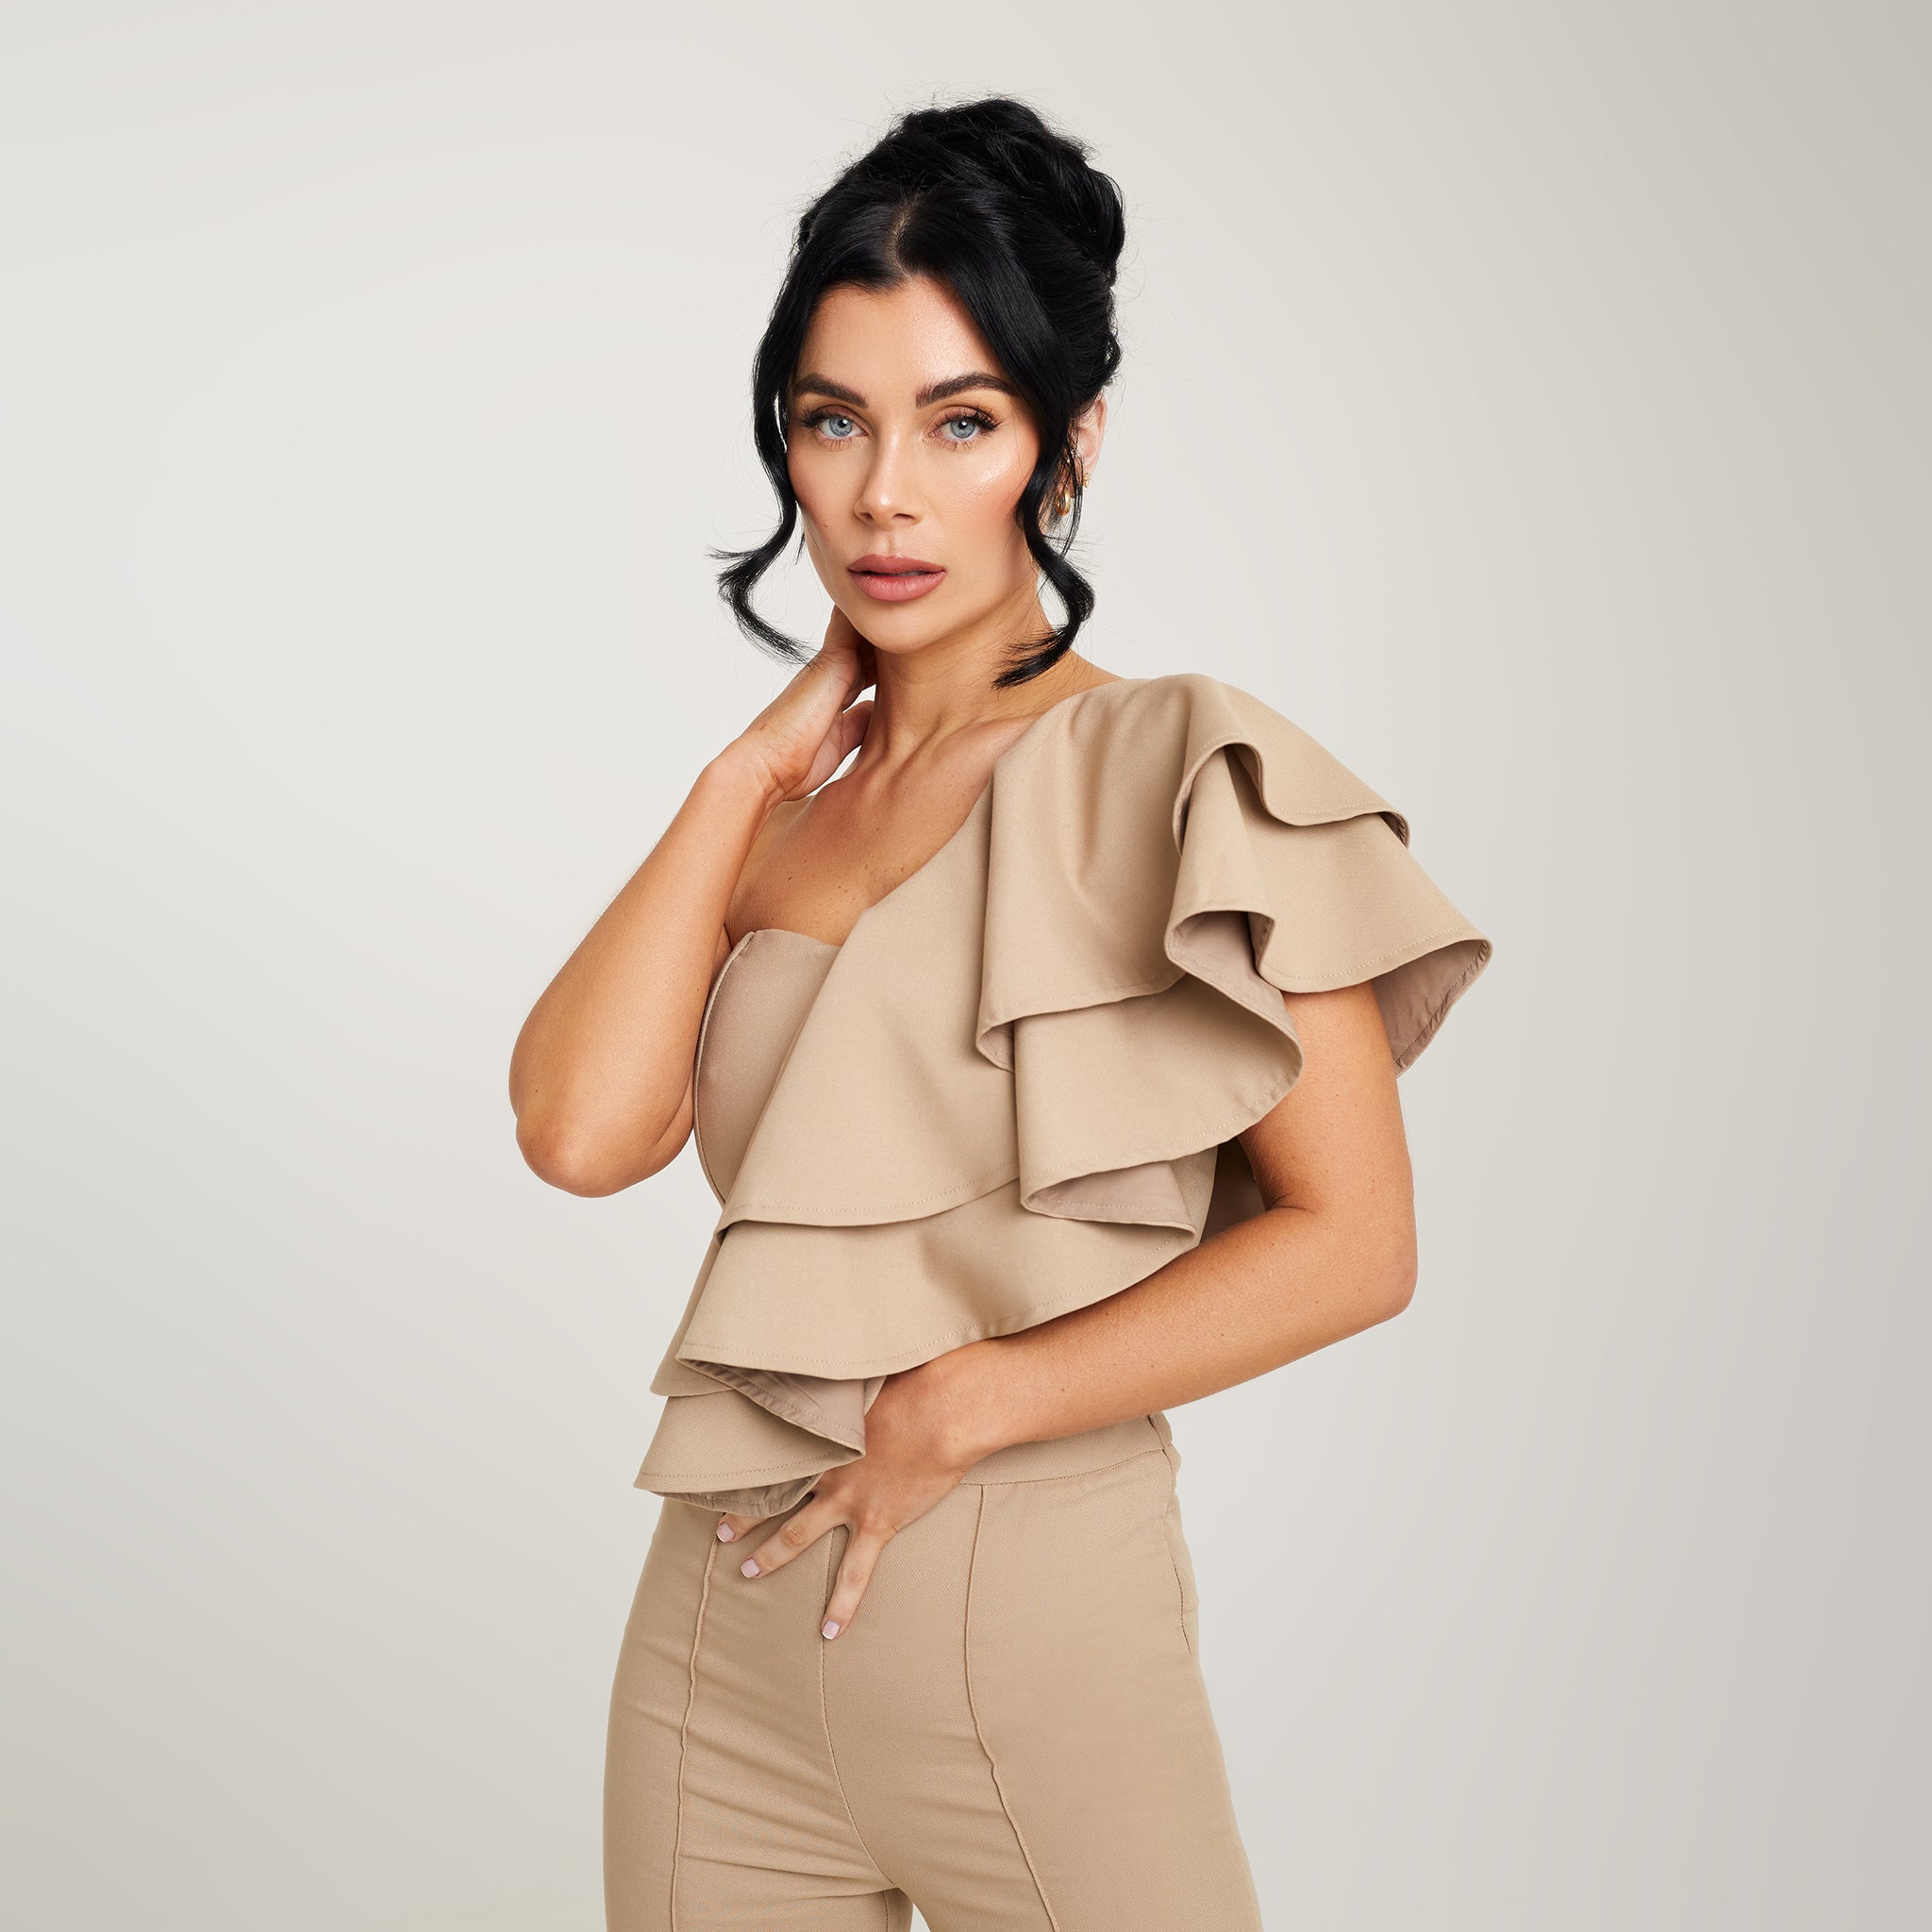 Cally Jane Beech, a woman with her hair styled up, models a beige one-shoulder ruffle cropped top. The top features a single shoulder strap, creating an asymmetrical neckline, while the ruffle detail delicately adorns the shoulder and extends down to the cropped hemline. The beige color adds a soft and neutral tone to the ensemble, offering versatility for various outfits.